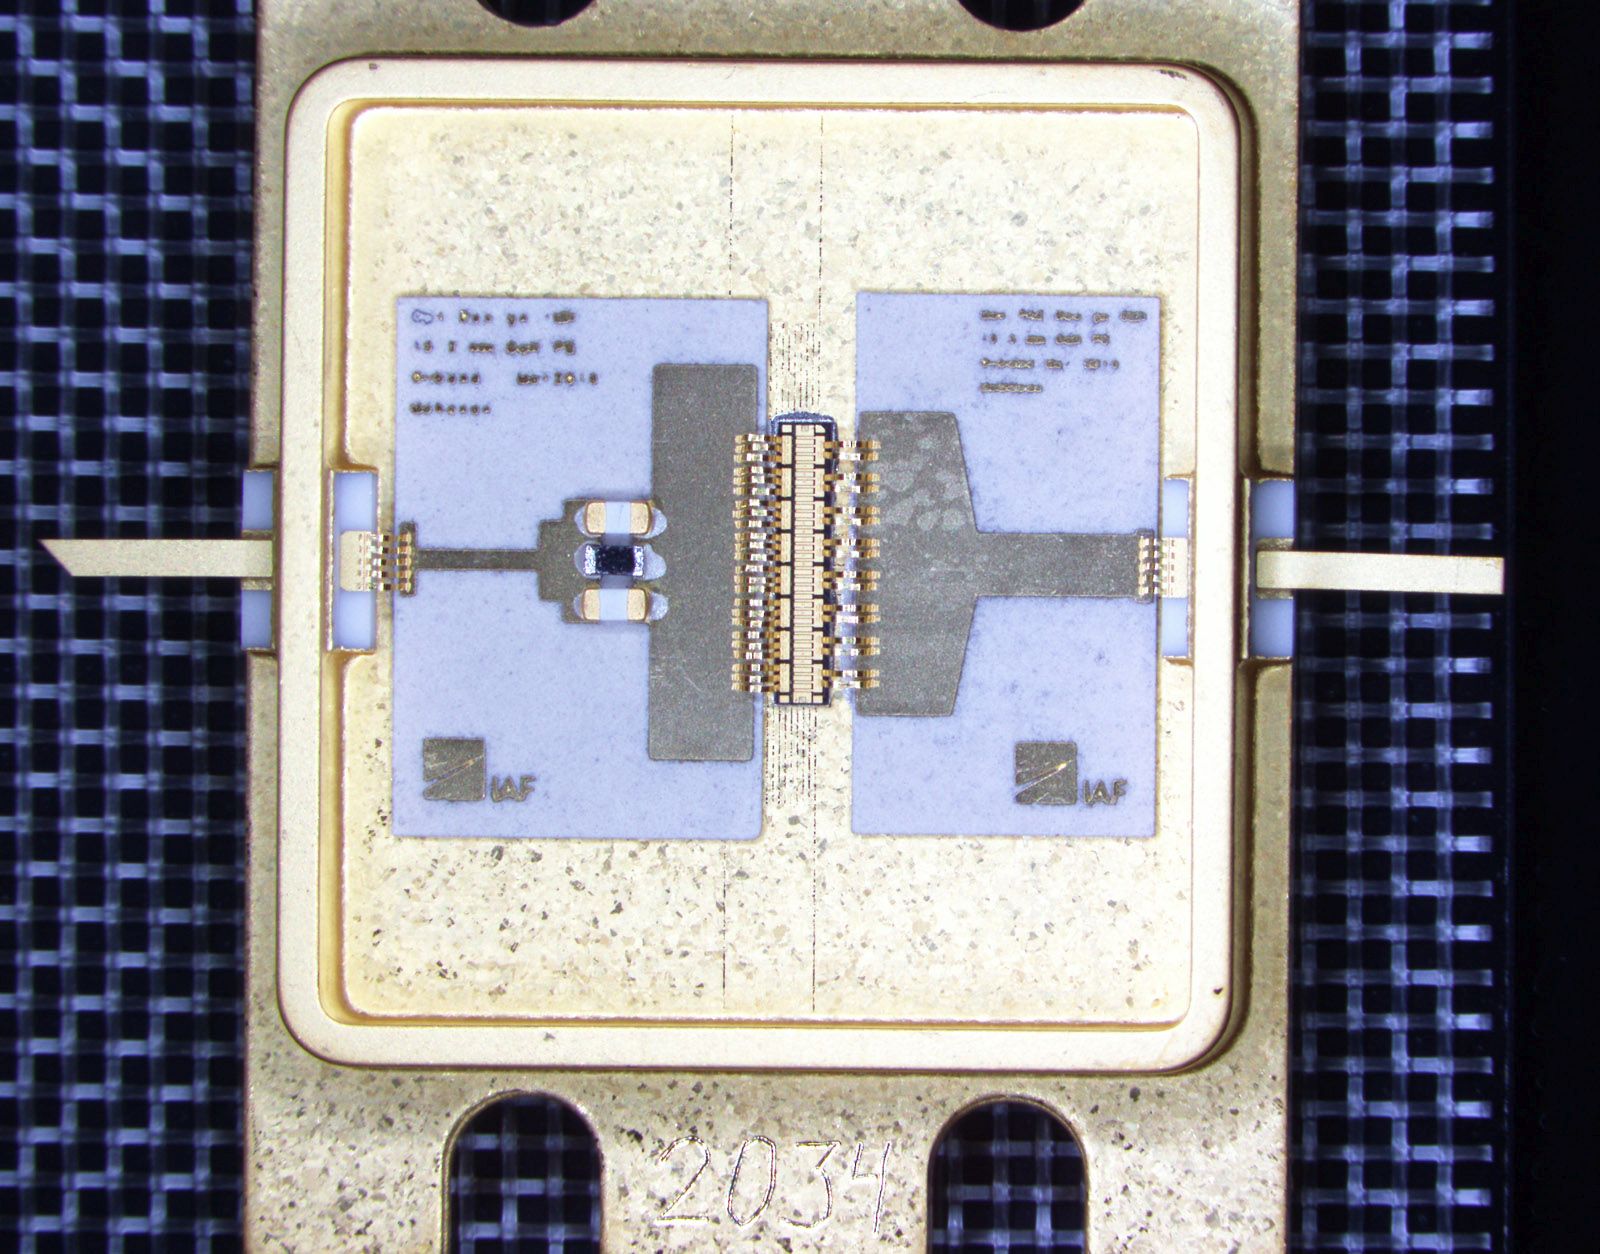 The power amplifier of the Fraunhofer IAF transmits at a frequency of 5.8 gigahertz. This frequency is needed for the new 5G mobile radio standard. The centrally placed gallium nitride (GaN) semi-conductor circuits are the central part of the packaged power amplifier. 